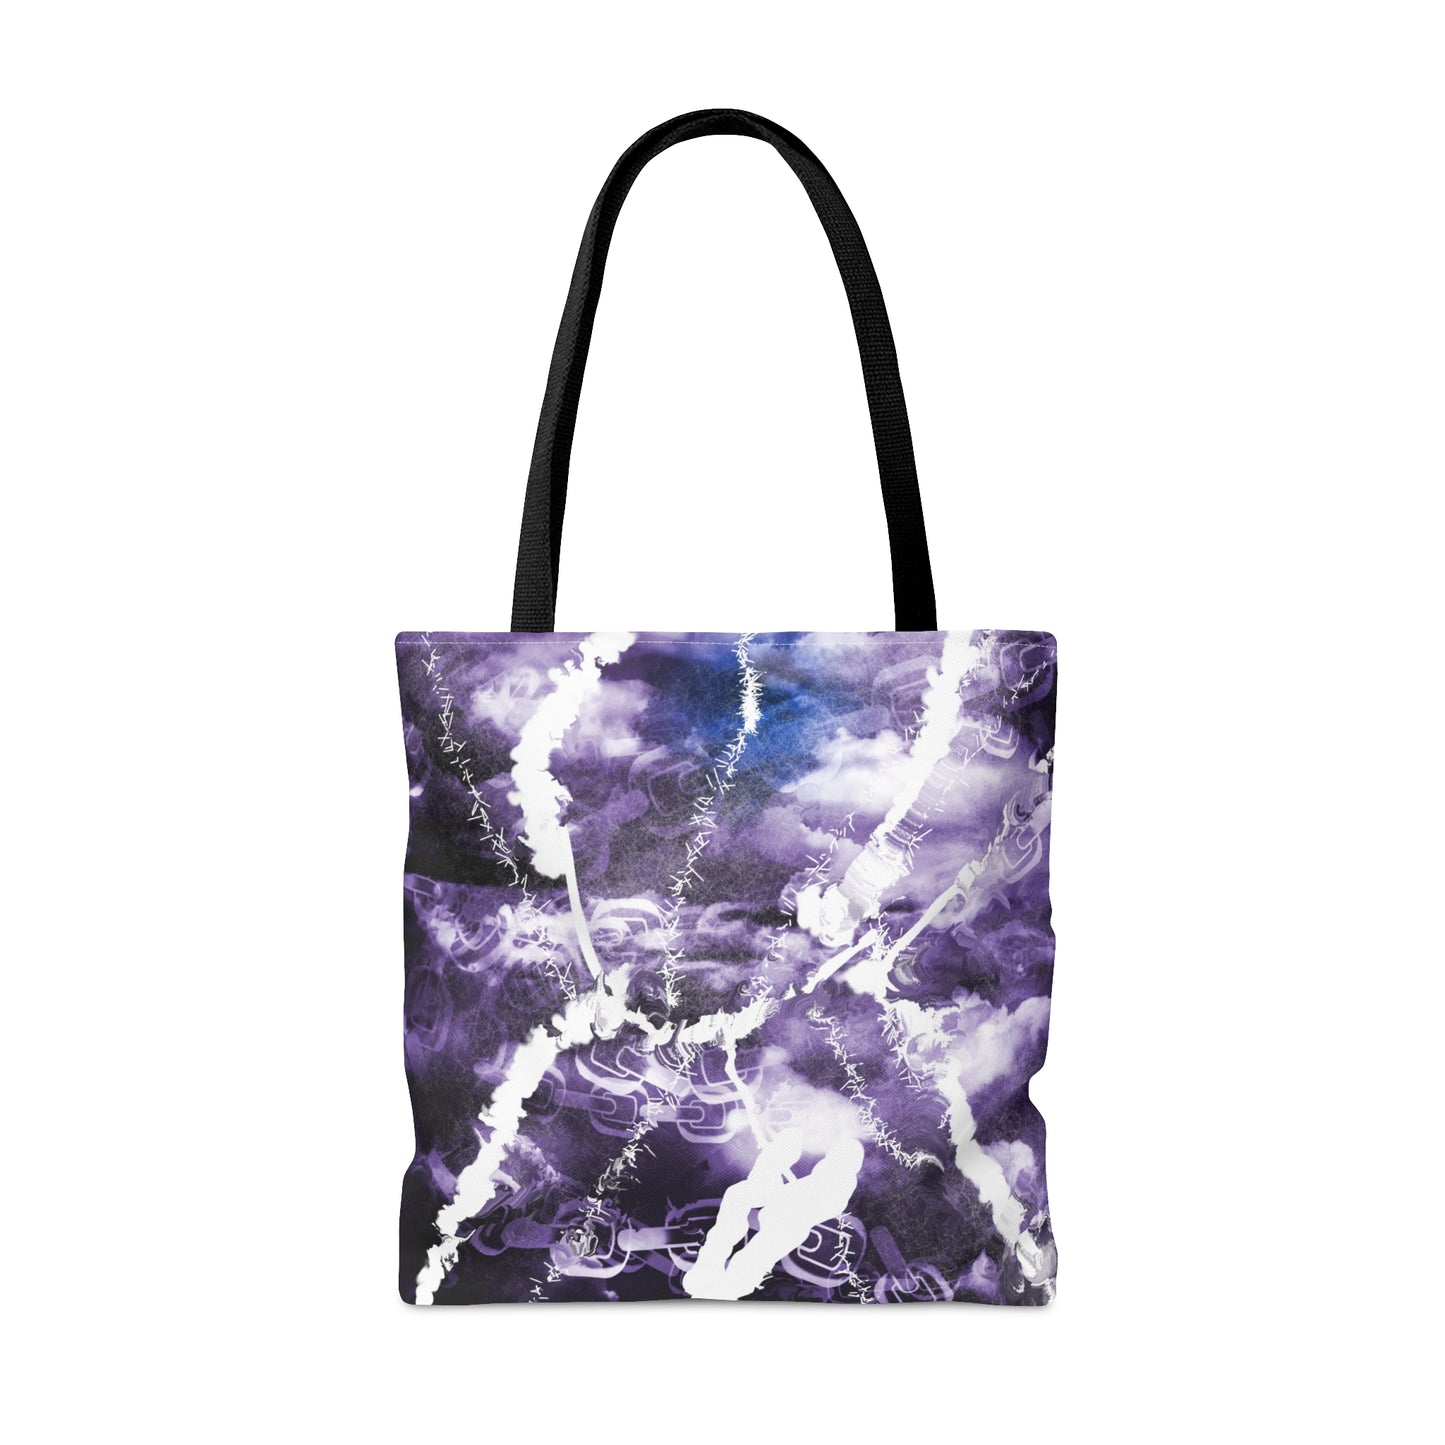 monochromatic storm abstract art Tote Bag